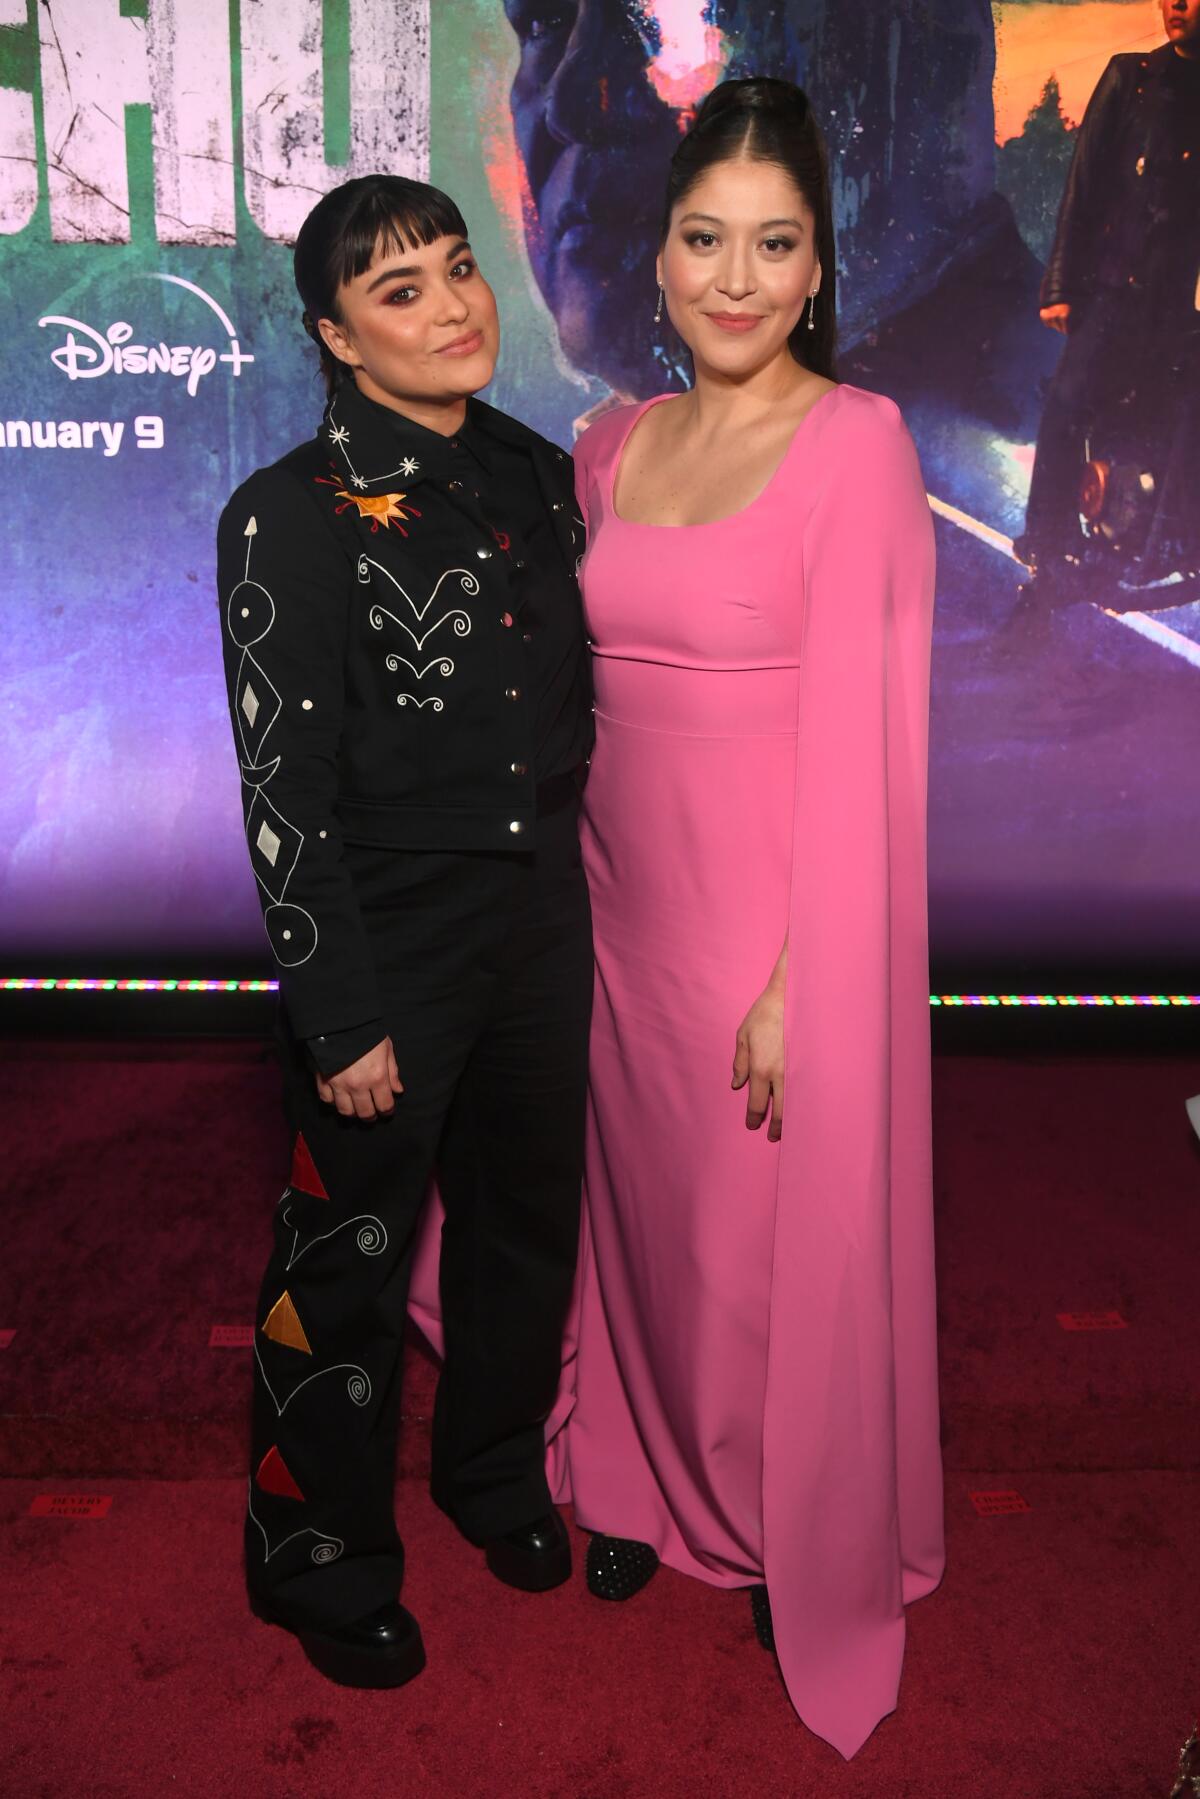 Devery Jacobs stands in a black suit with abstract designs next to Alaqua Cox, clad in a pink gown